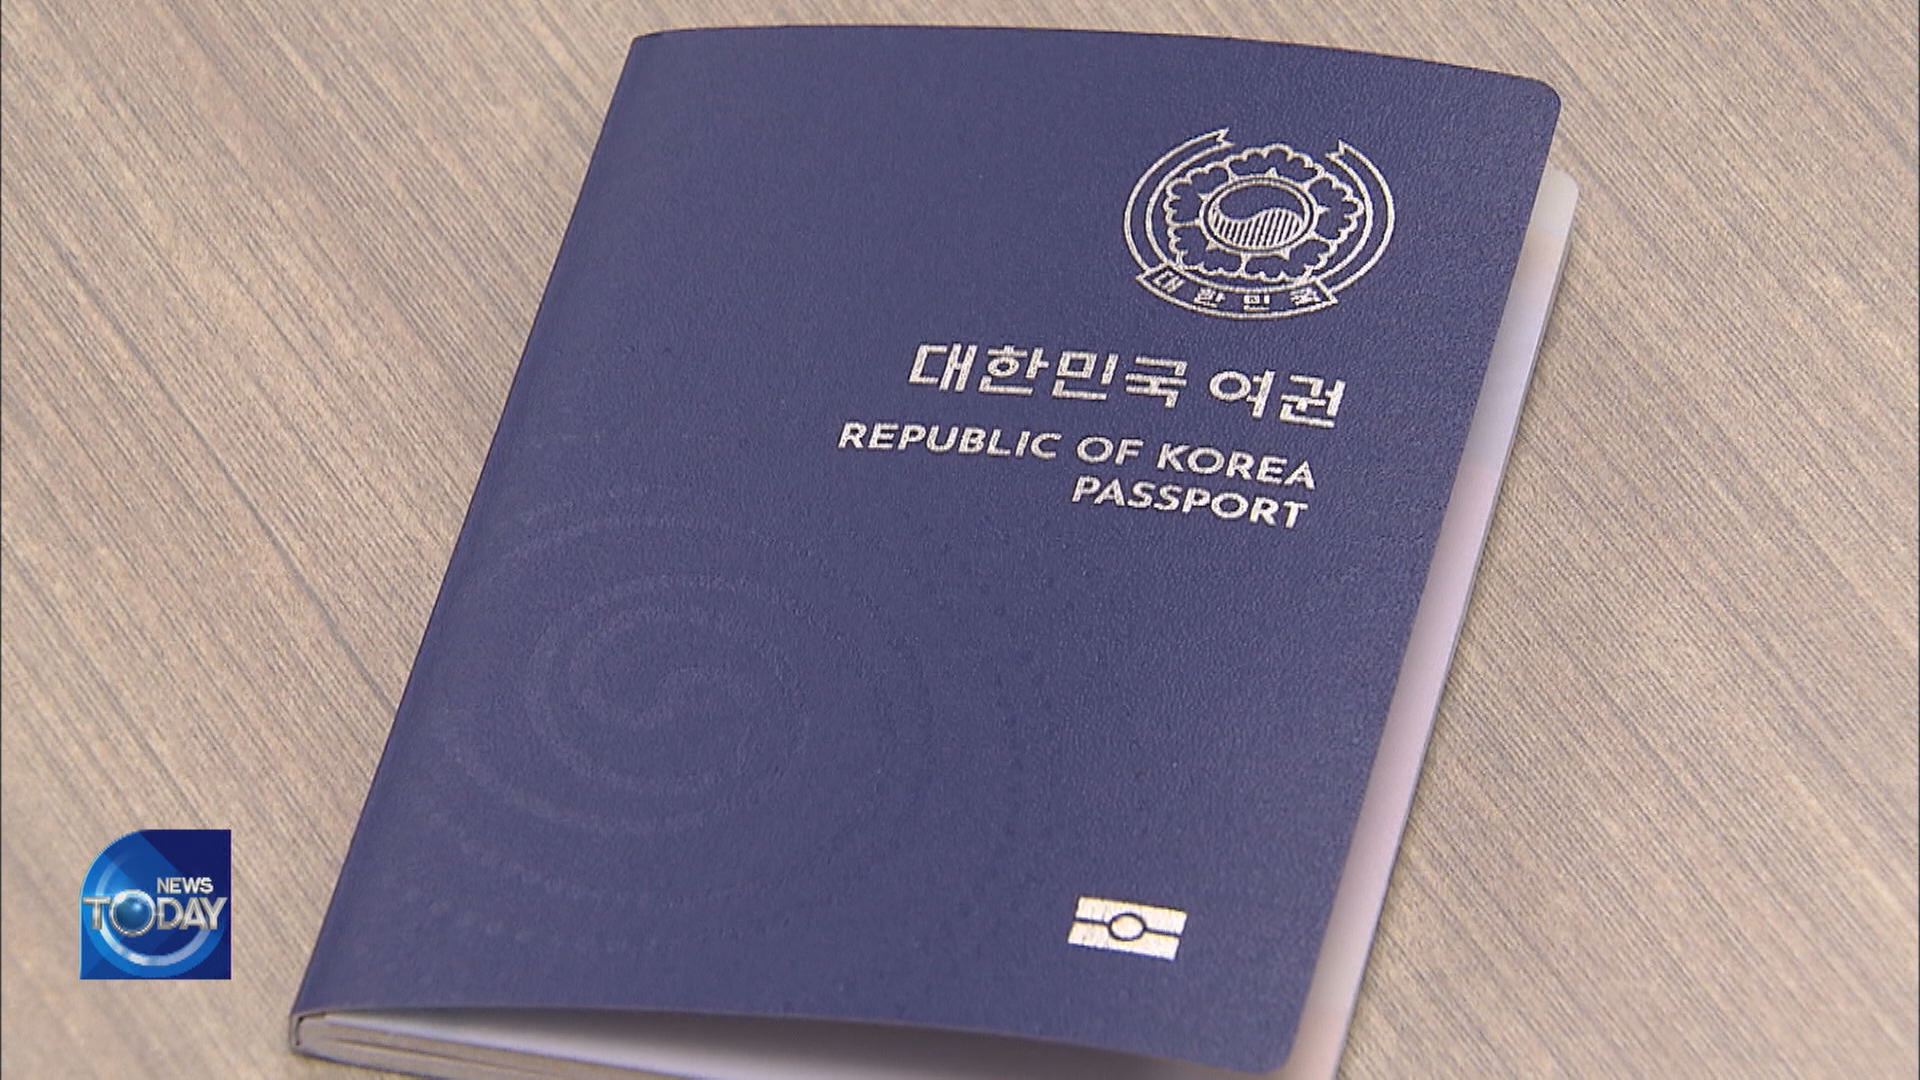 NEW PASSPORTS FROM DECEMBER